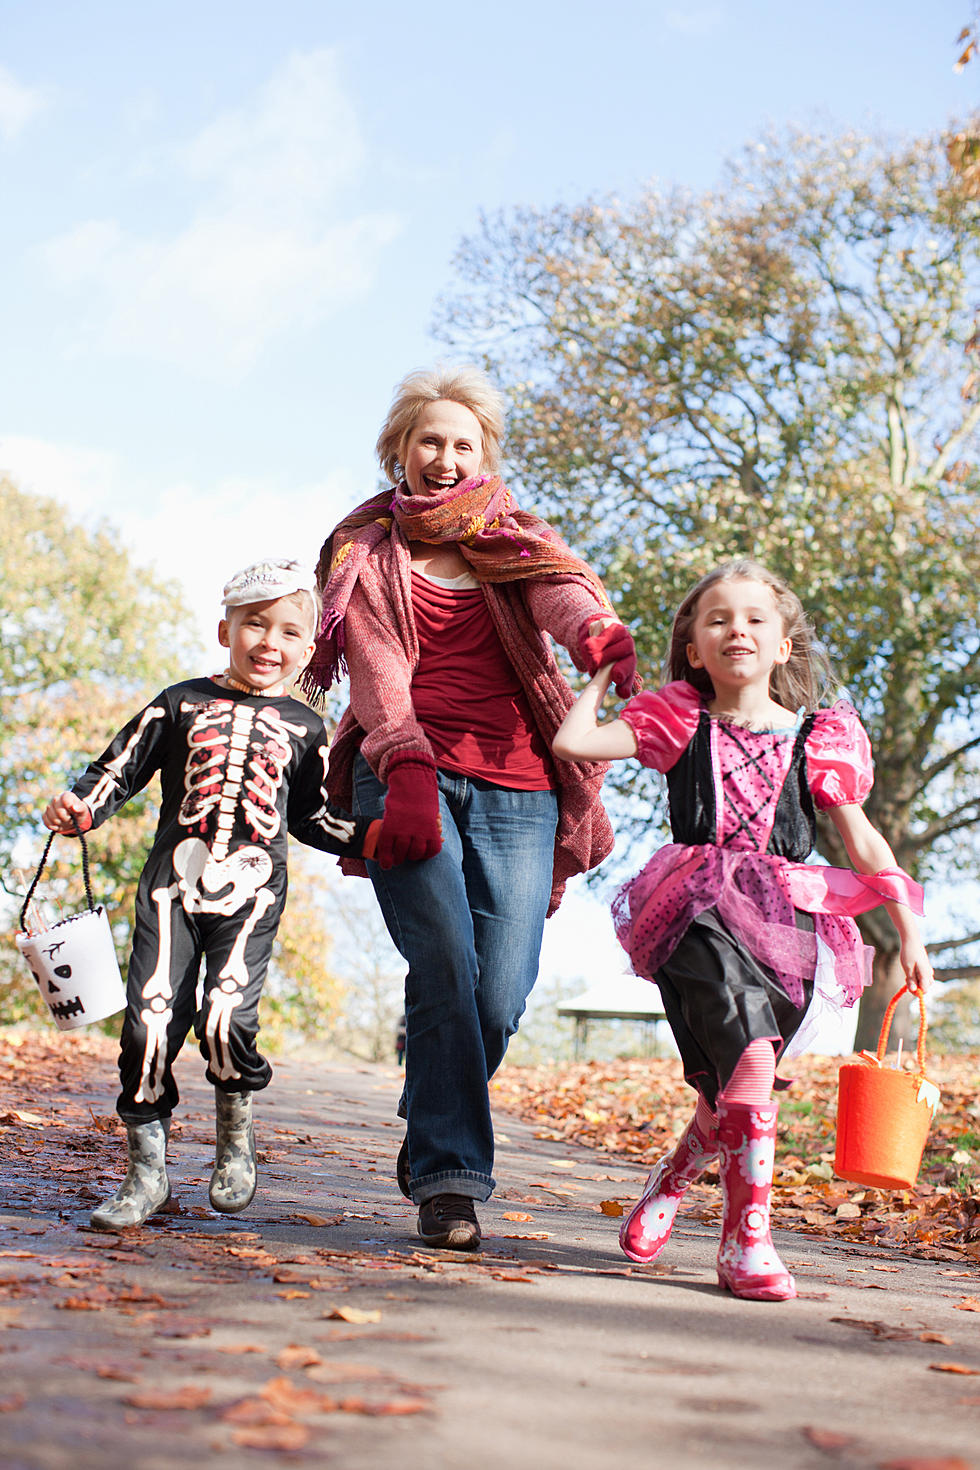 Halloween Tips From A Mom Of 3